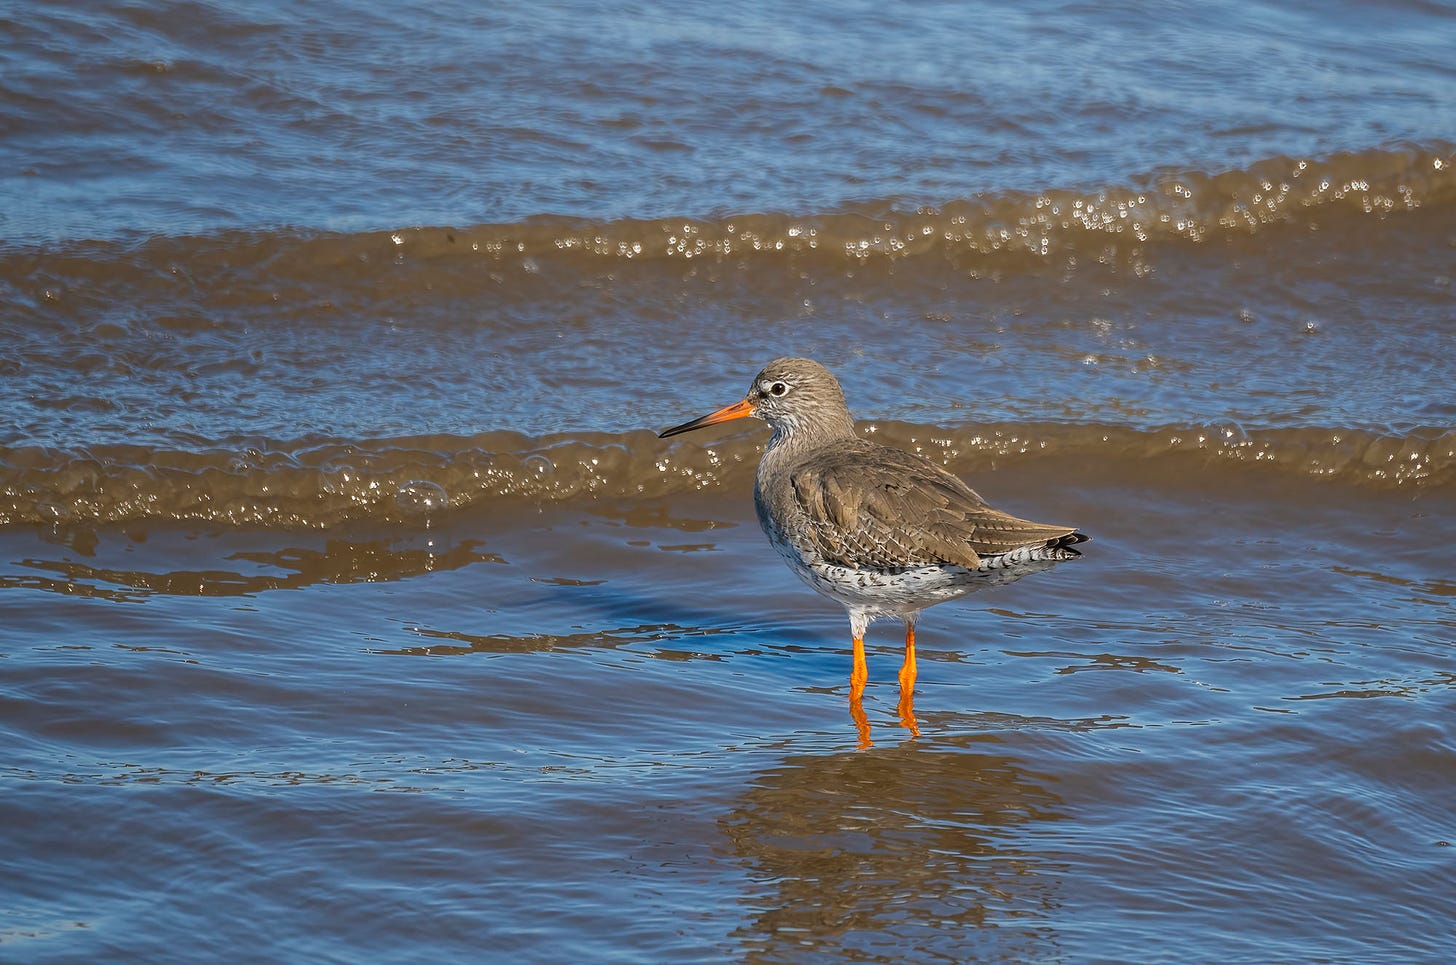 Photo of a redshank standing in shallow water with gentle waves in the background